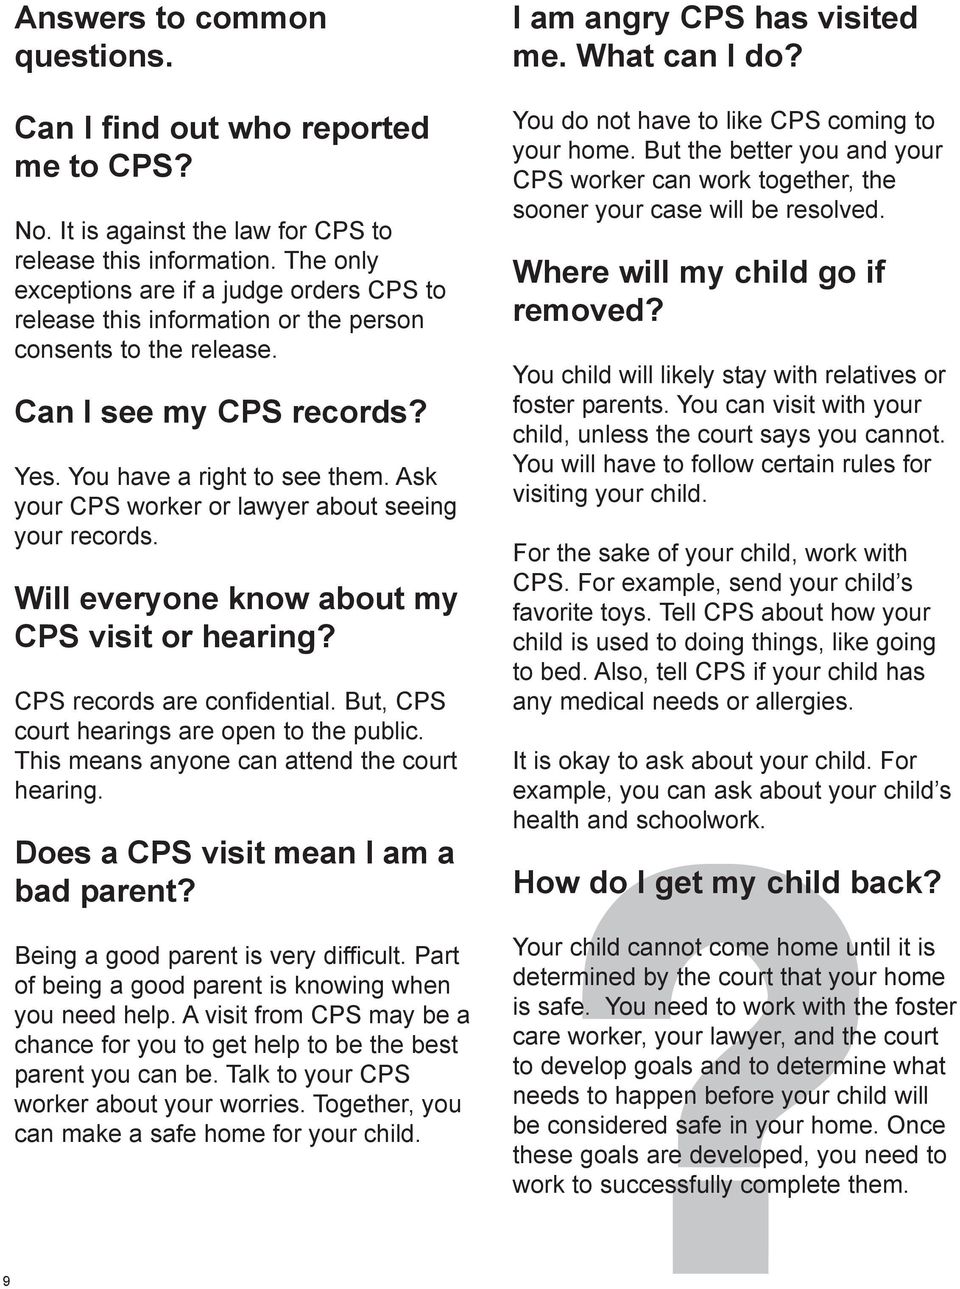 Ask your CPS worker or lawyer about seeing your records. Will everyone know about my CPS visit or hearing? CPS records are confidential. But, CPS court hearings are open to the public.